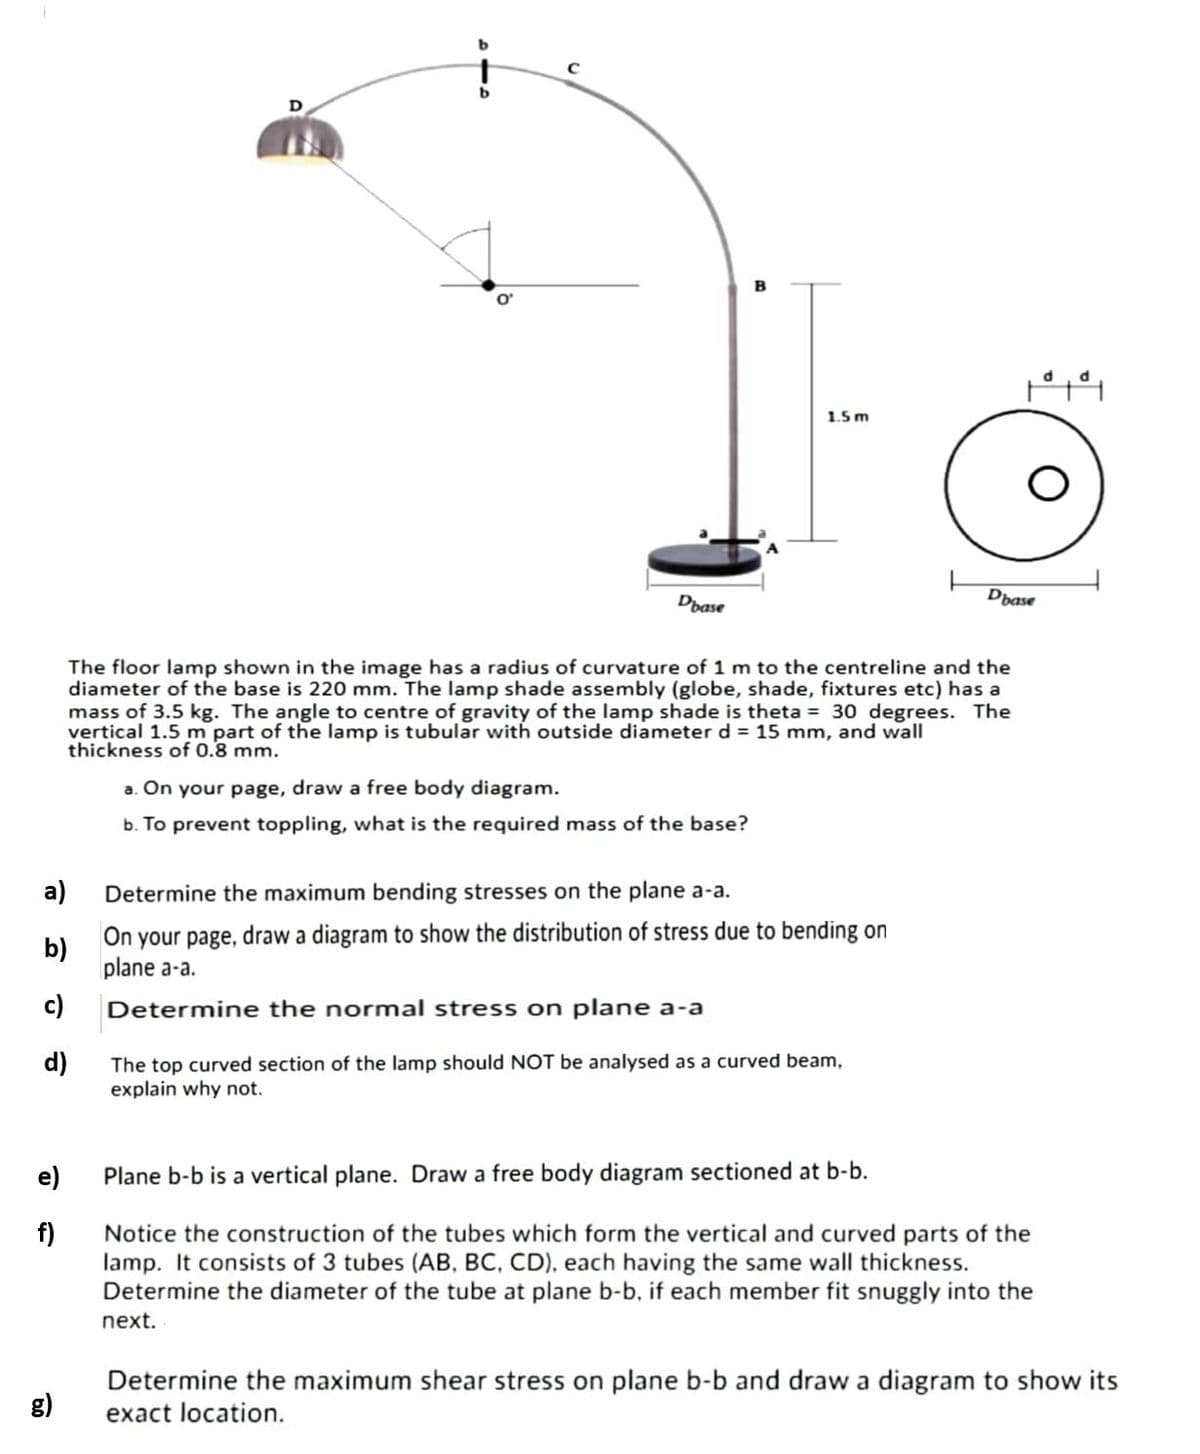 1.5 m
Dbase
Dase
The floor lamp shown in the image has a radius of curvature of 1 m to the centreline and the
diameter of the base is 220 mm. The lamp shade assembly (globe, shade, fixtures etc) has a
mass of 3.5 kg. The angle to centre of gravity of the lamp shade is theta = 30 degrees. The
vertical 1.5 m part of the lamp is tubular with outside diameter d = 15 mm, and wall
thickness of 0.8 mm.
a. On your page, draw a free body diagram.
b. To prevent toppling, what is the required mass of the base?
a)
Determine the maximum bending stresses on the plane a-a.
b)
On your page, draw a diagram to show the distribution of stress due to bending on
plane a-a.
c)
Determine the normal stress on plane a-a
d)
The top curved section of the lamp should NOT be analysed as a curved beam,
explain why not.
e)
Plane b-b is a vertical plane. Draw a free body diagram sectioned at b-b.
f)
Notice the construction of the tubes which form the vertical and curved parts of the
lamp. It consists of 3 tubes (AB, BC, CD), each having the same wall thickness.
Determine the diameter of the tube at plane b-b, if each member fit snuggly into the
next.
Determine the maximum shear stress on plane b-b and draw a diagram to show its
exact location.
g)
